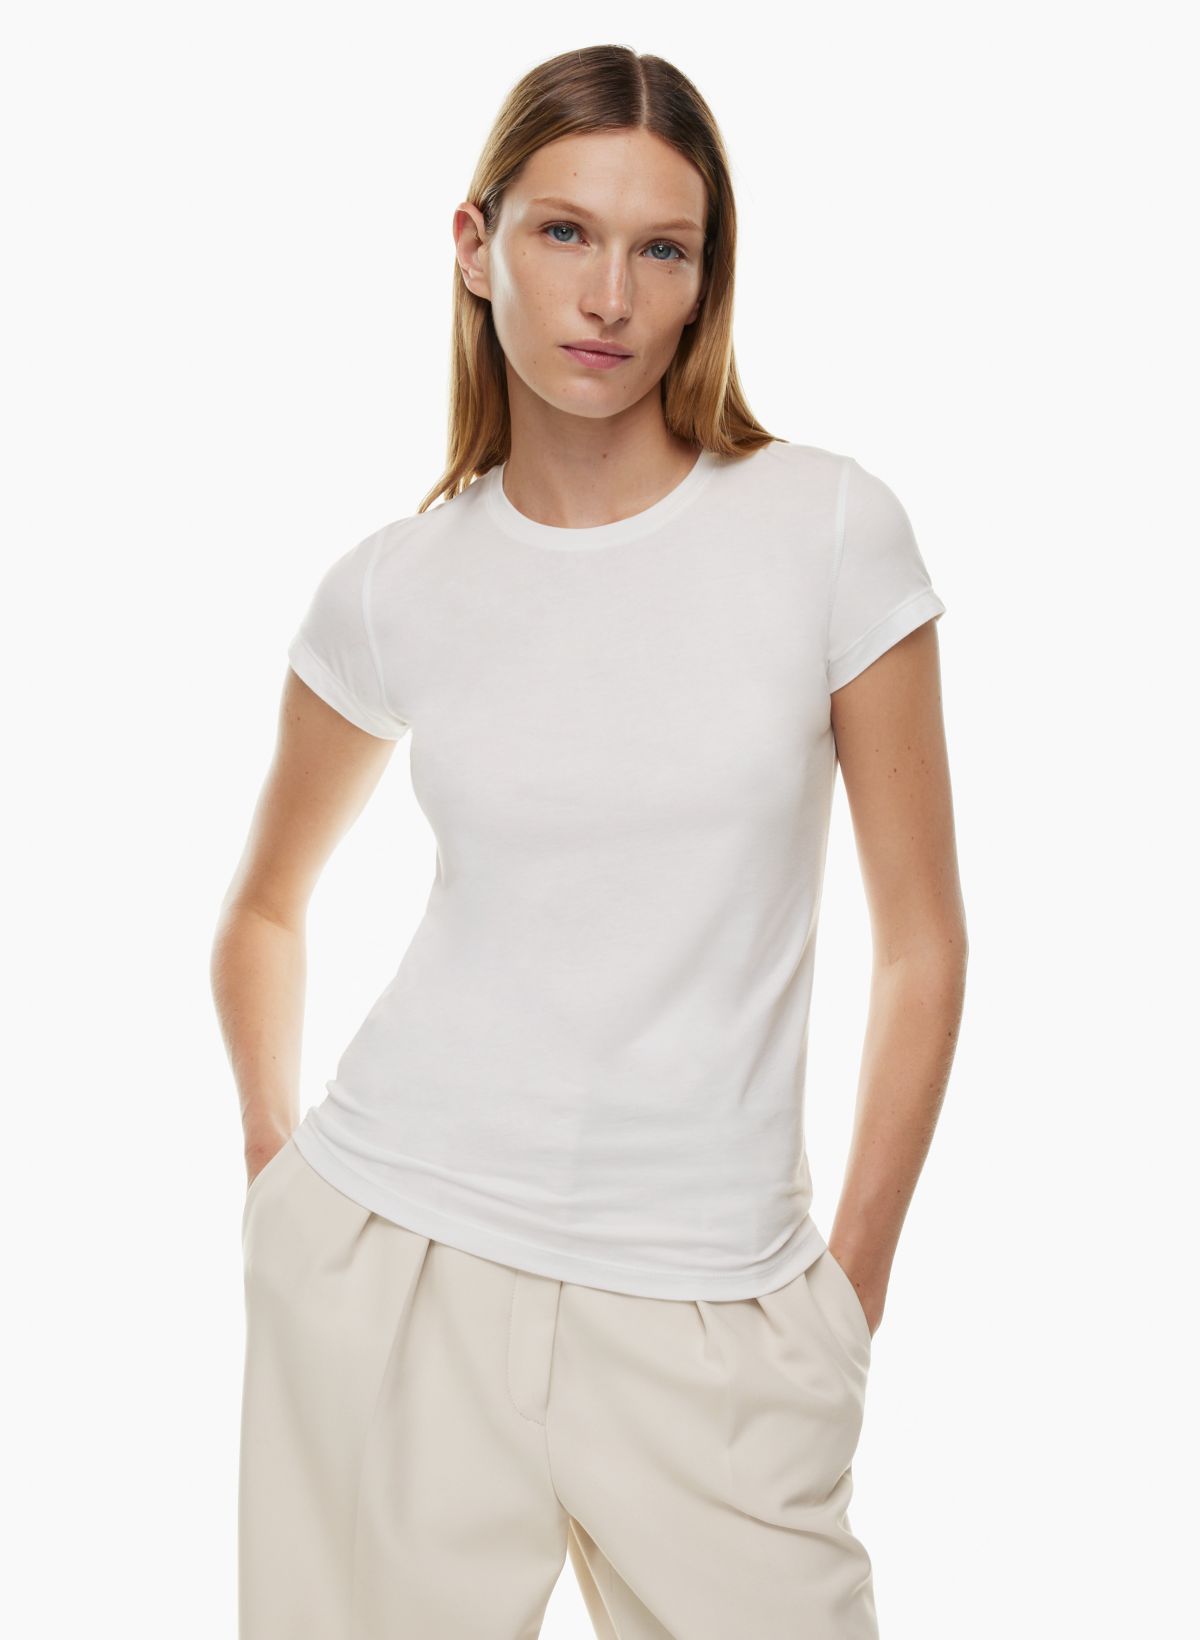 Buy LIFE DREAM Tops for Women, Stylish Cotton Casual Round Neck